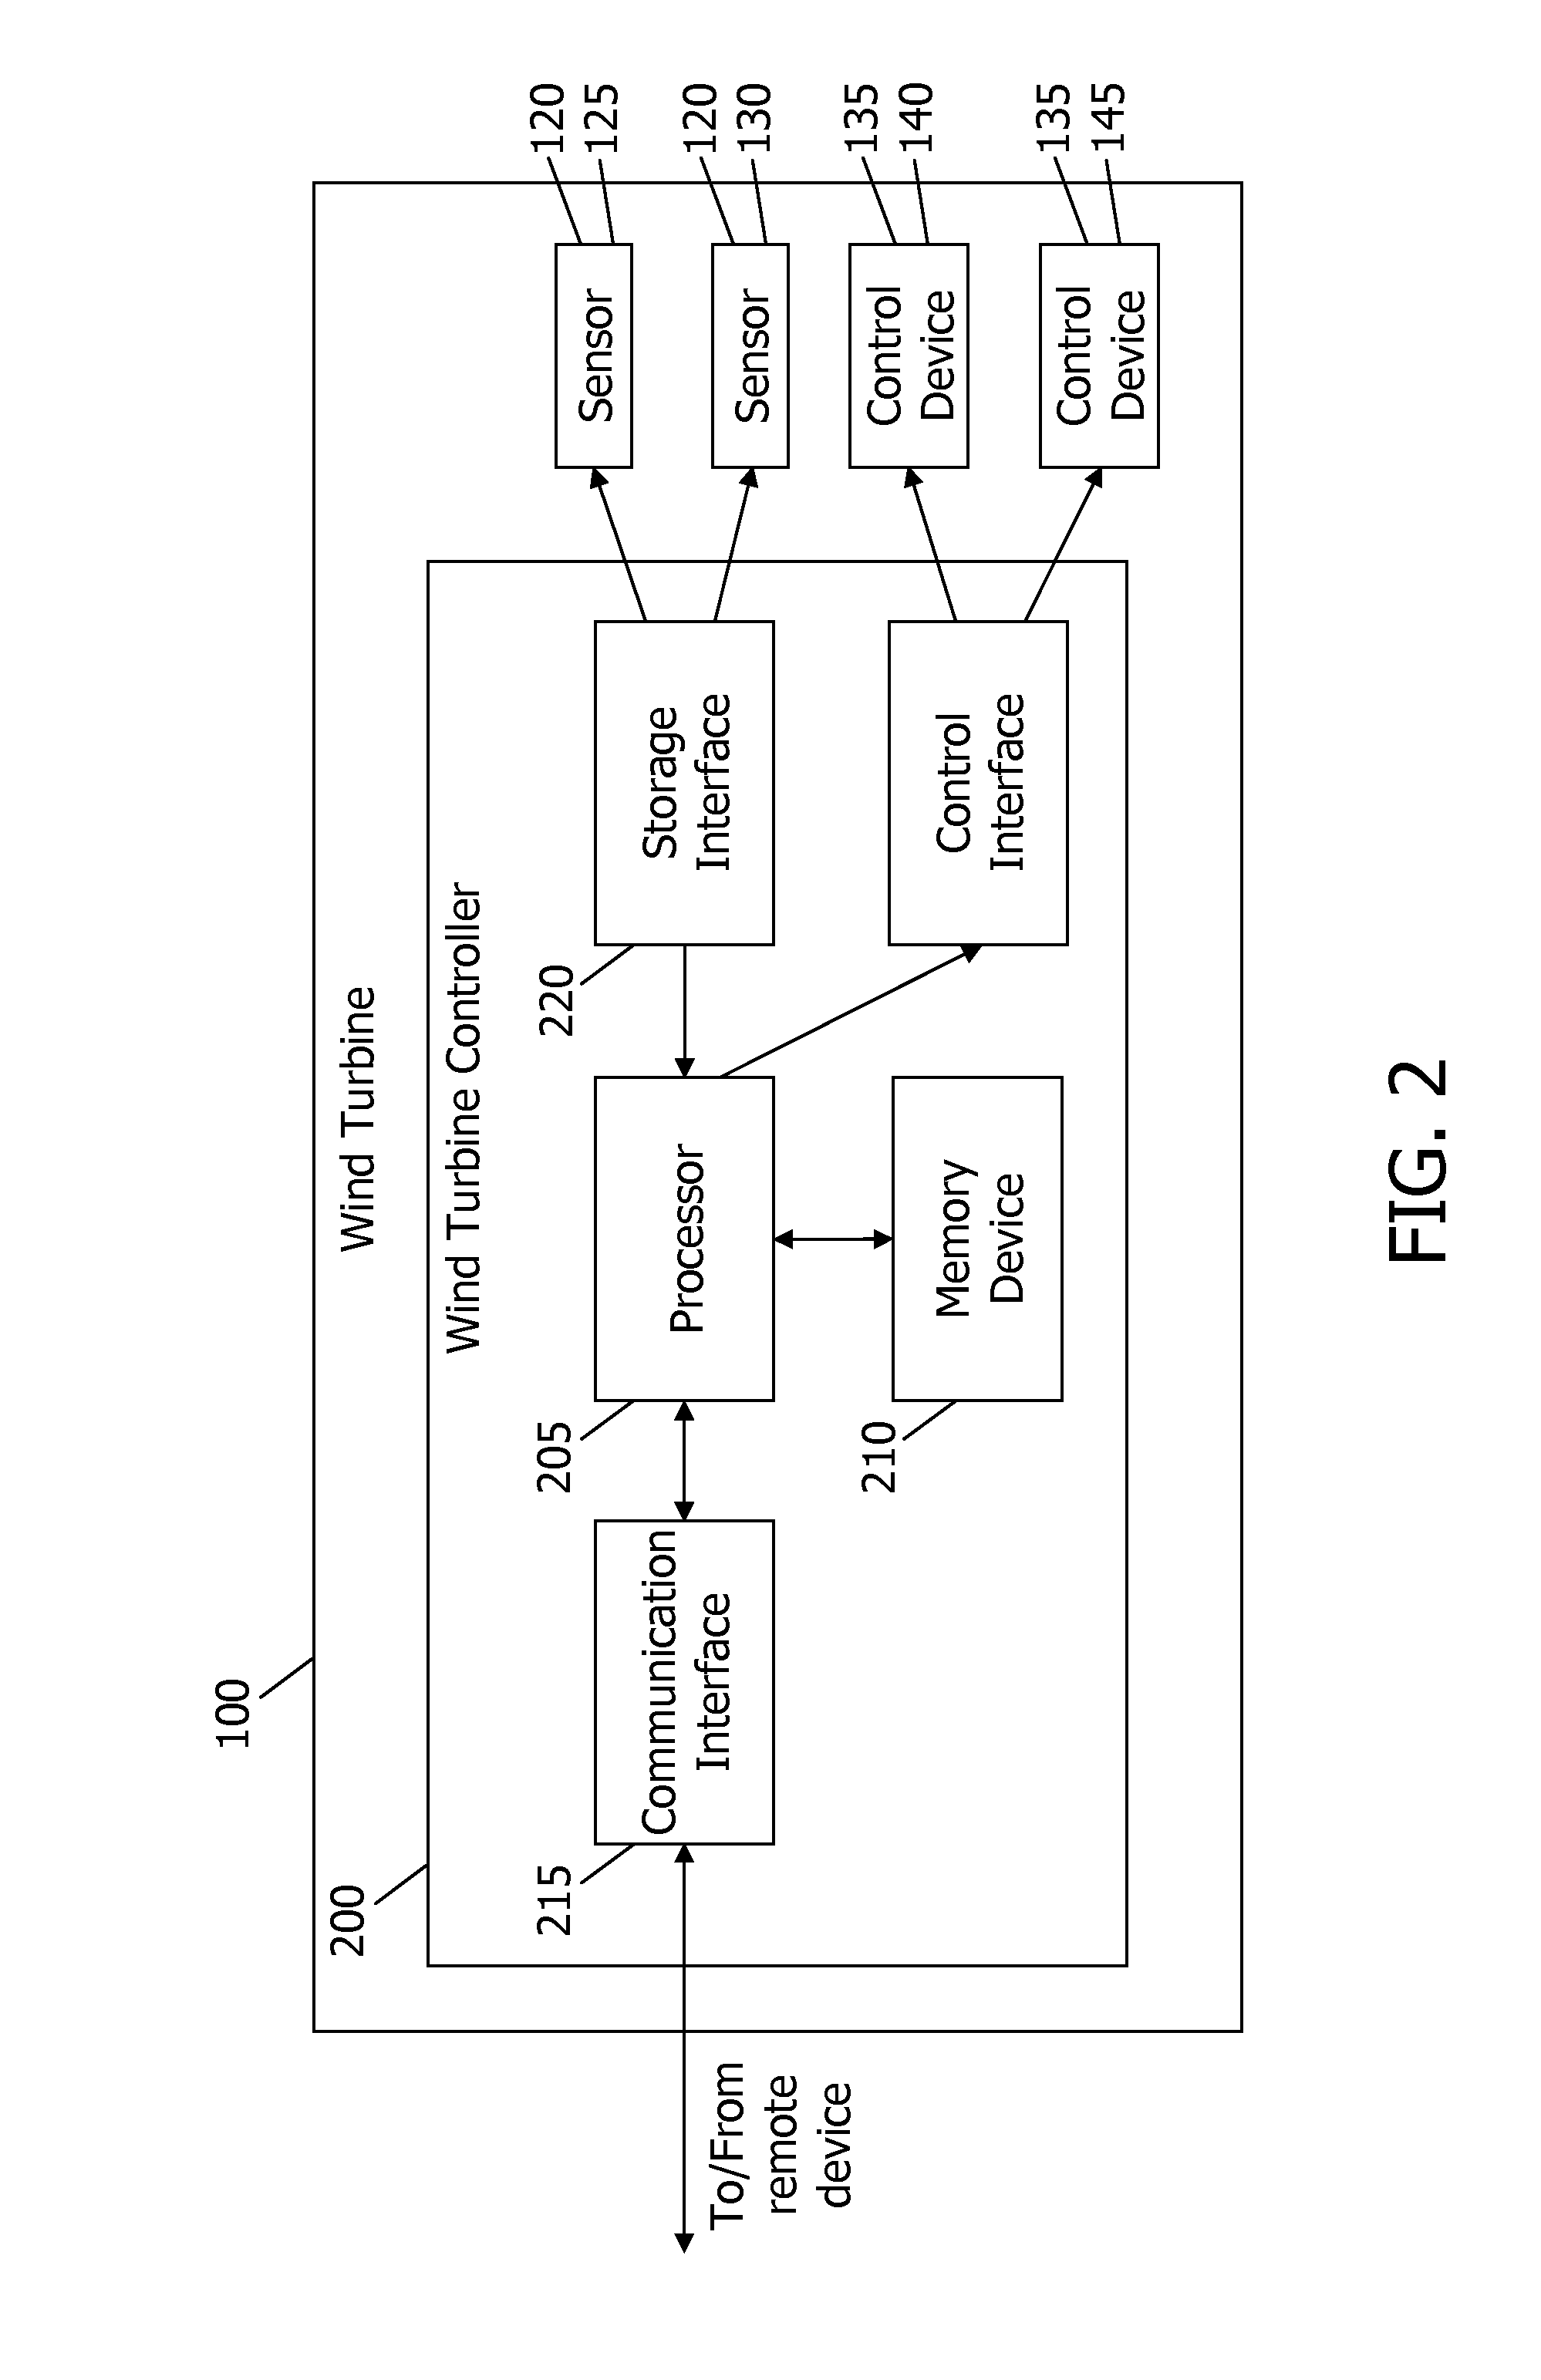 System and method for detecting anamolies in wind turbines